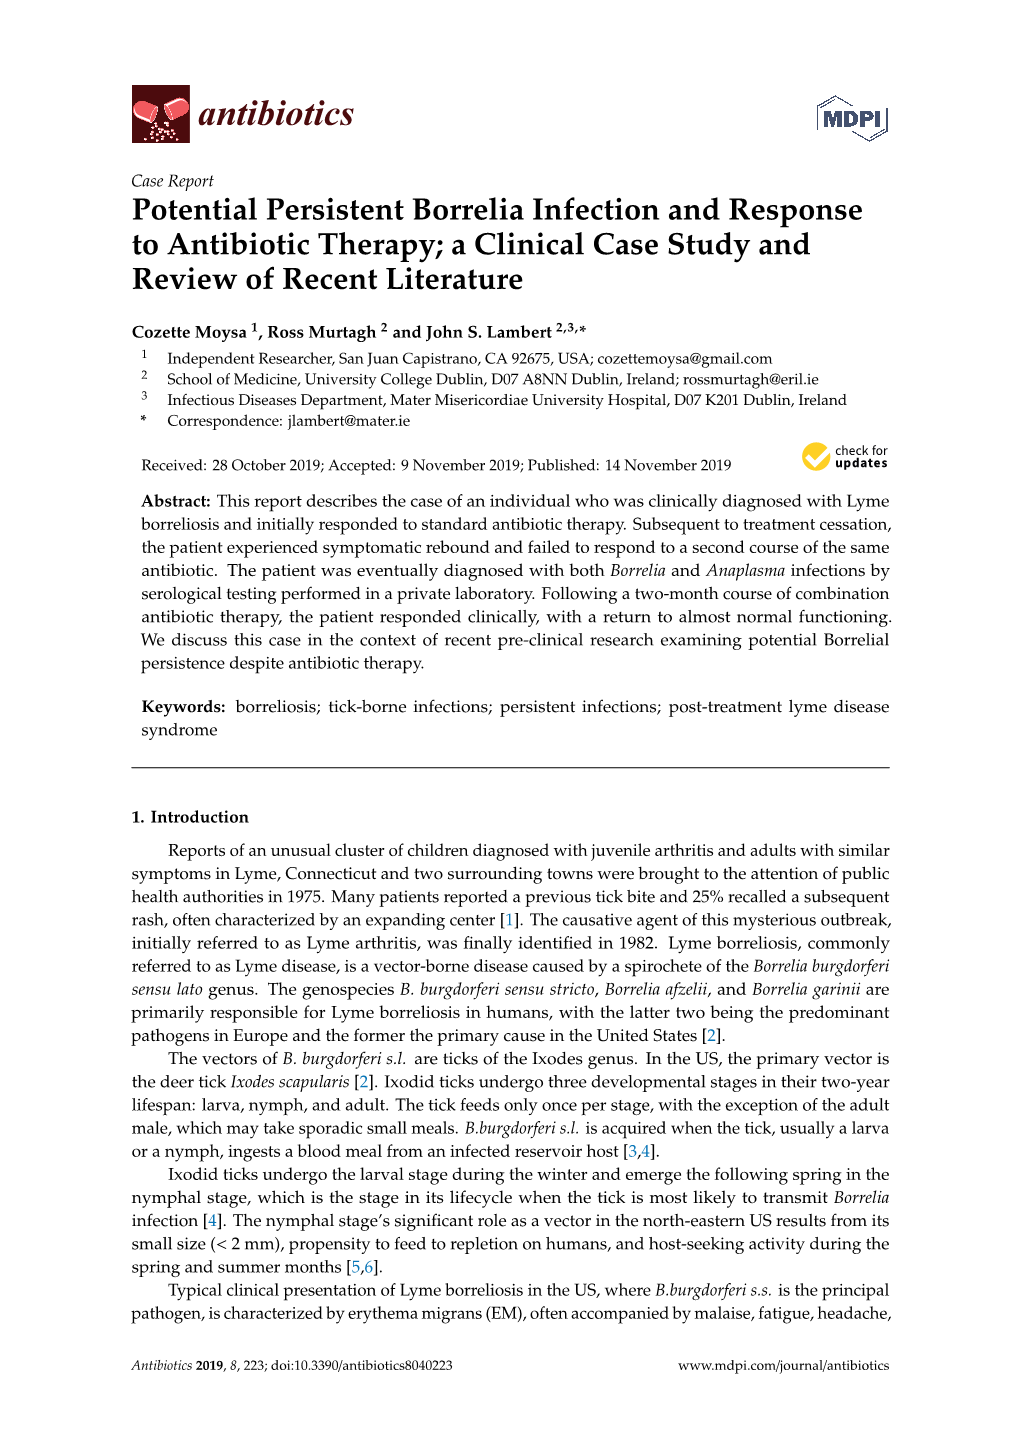 Potential Persistent Borrelia Infection and Response to Antibiotic Therapy; a Clinical Case Study and Review of Recent Literature